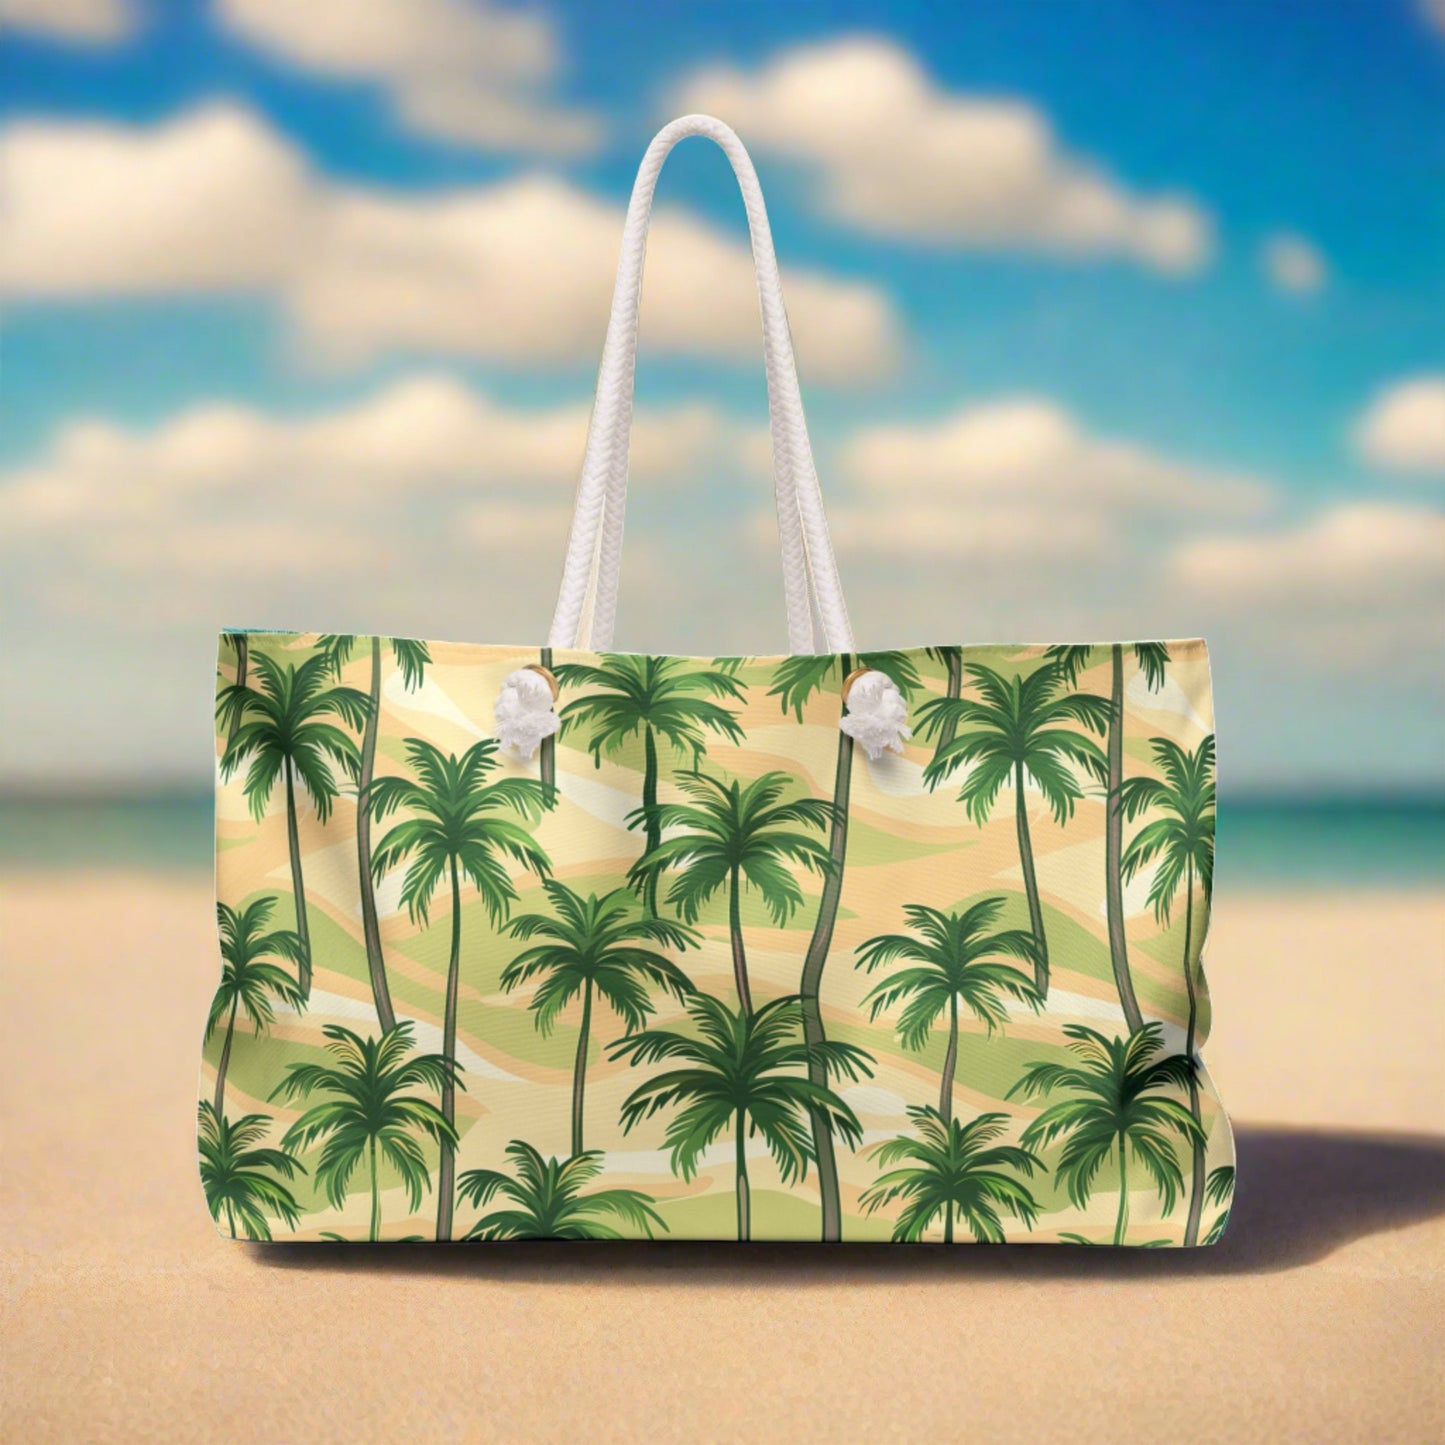 Deluxe Tropical Palms Beach & Tote Bag with Sandy Palm Tree Design (24" × 13" x 5.5")